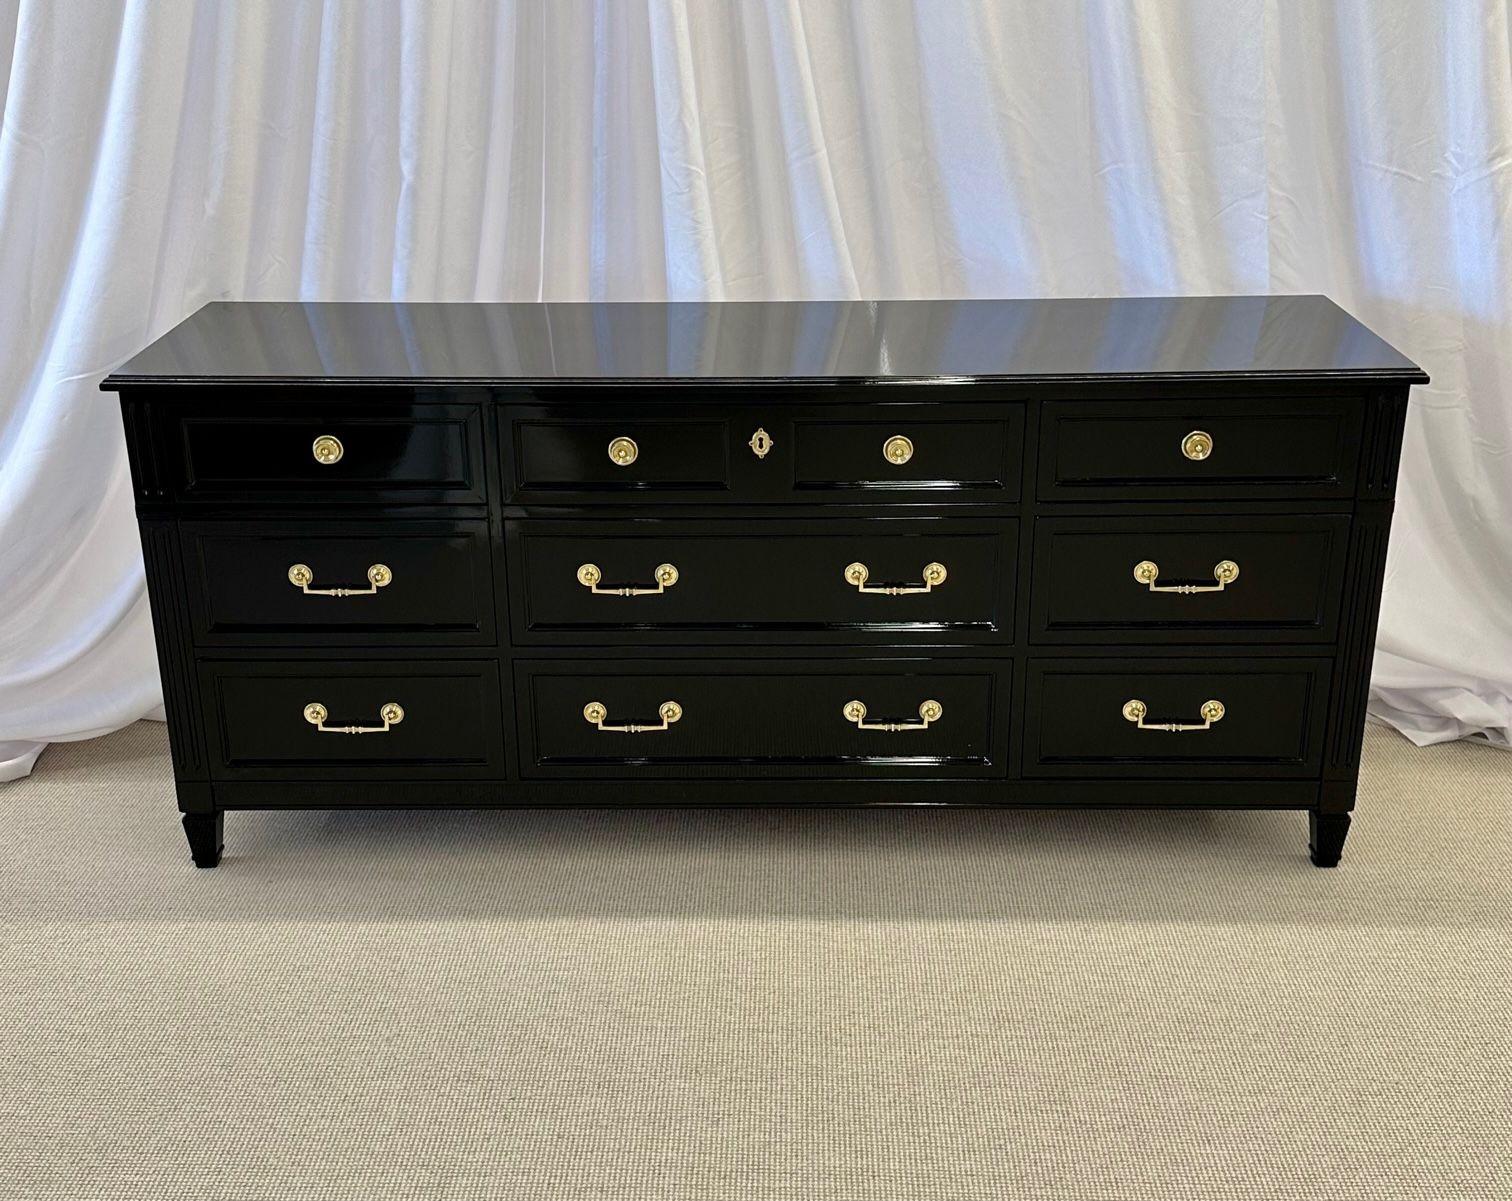 Hollywood Regency Ebony dresser, sideboard, chest, commode or cabinet, bronze Hollywood regency 
A Mid-Century Modern Ebony dresser or Chest fully refinished in the Hollywood Regency Fashion. Three smaller drawers above six larger drawers make this